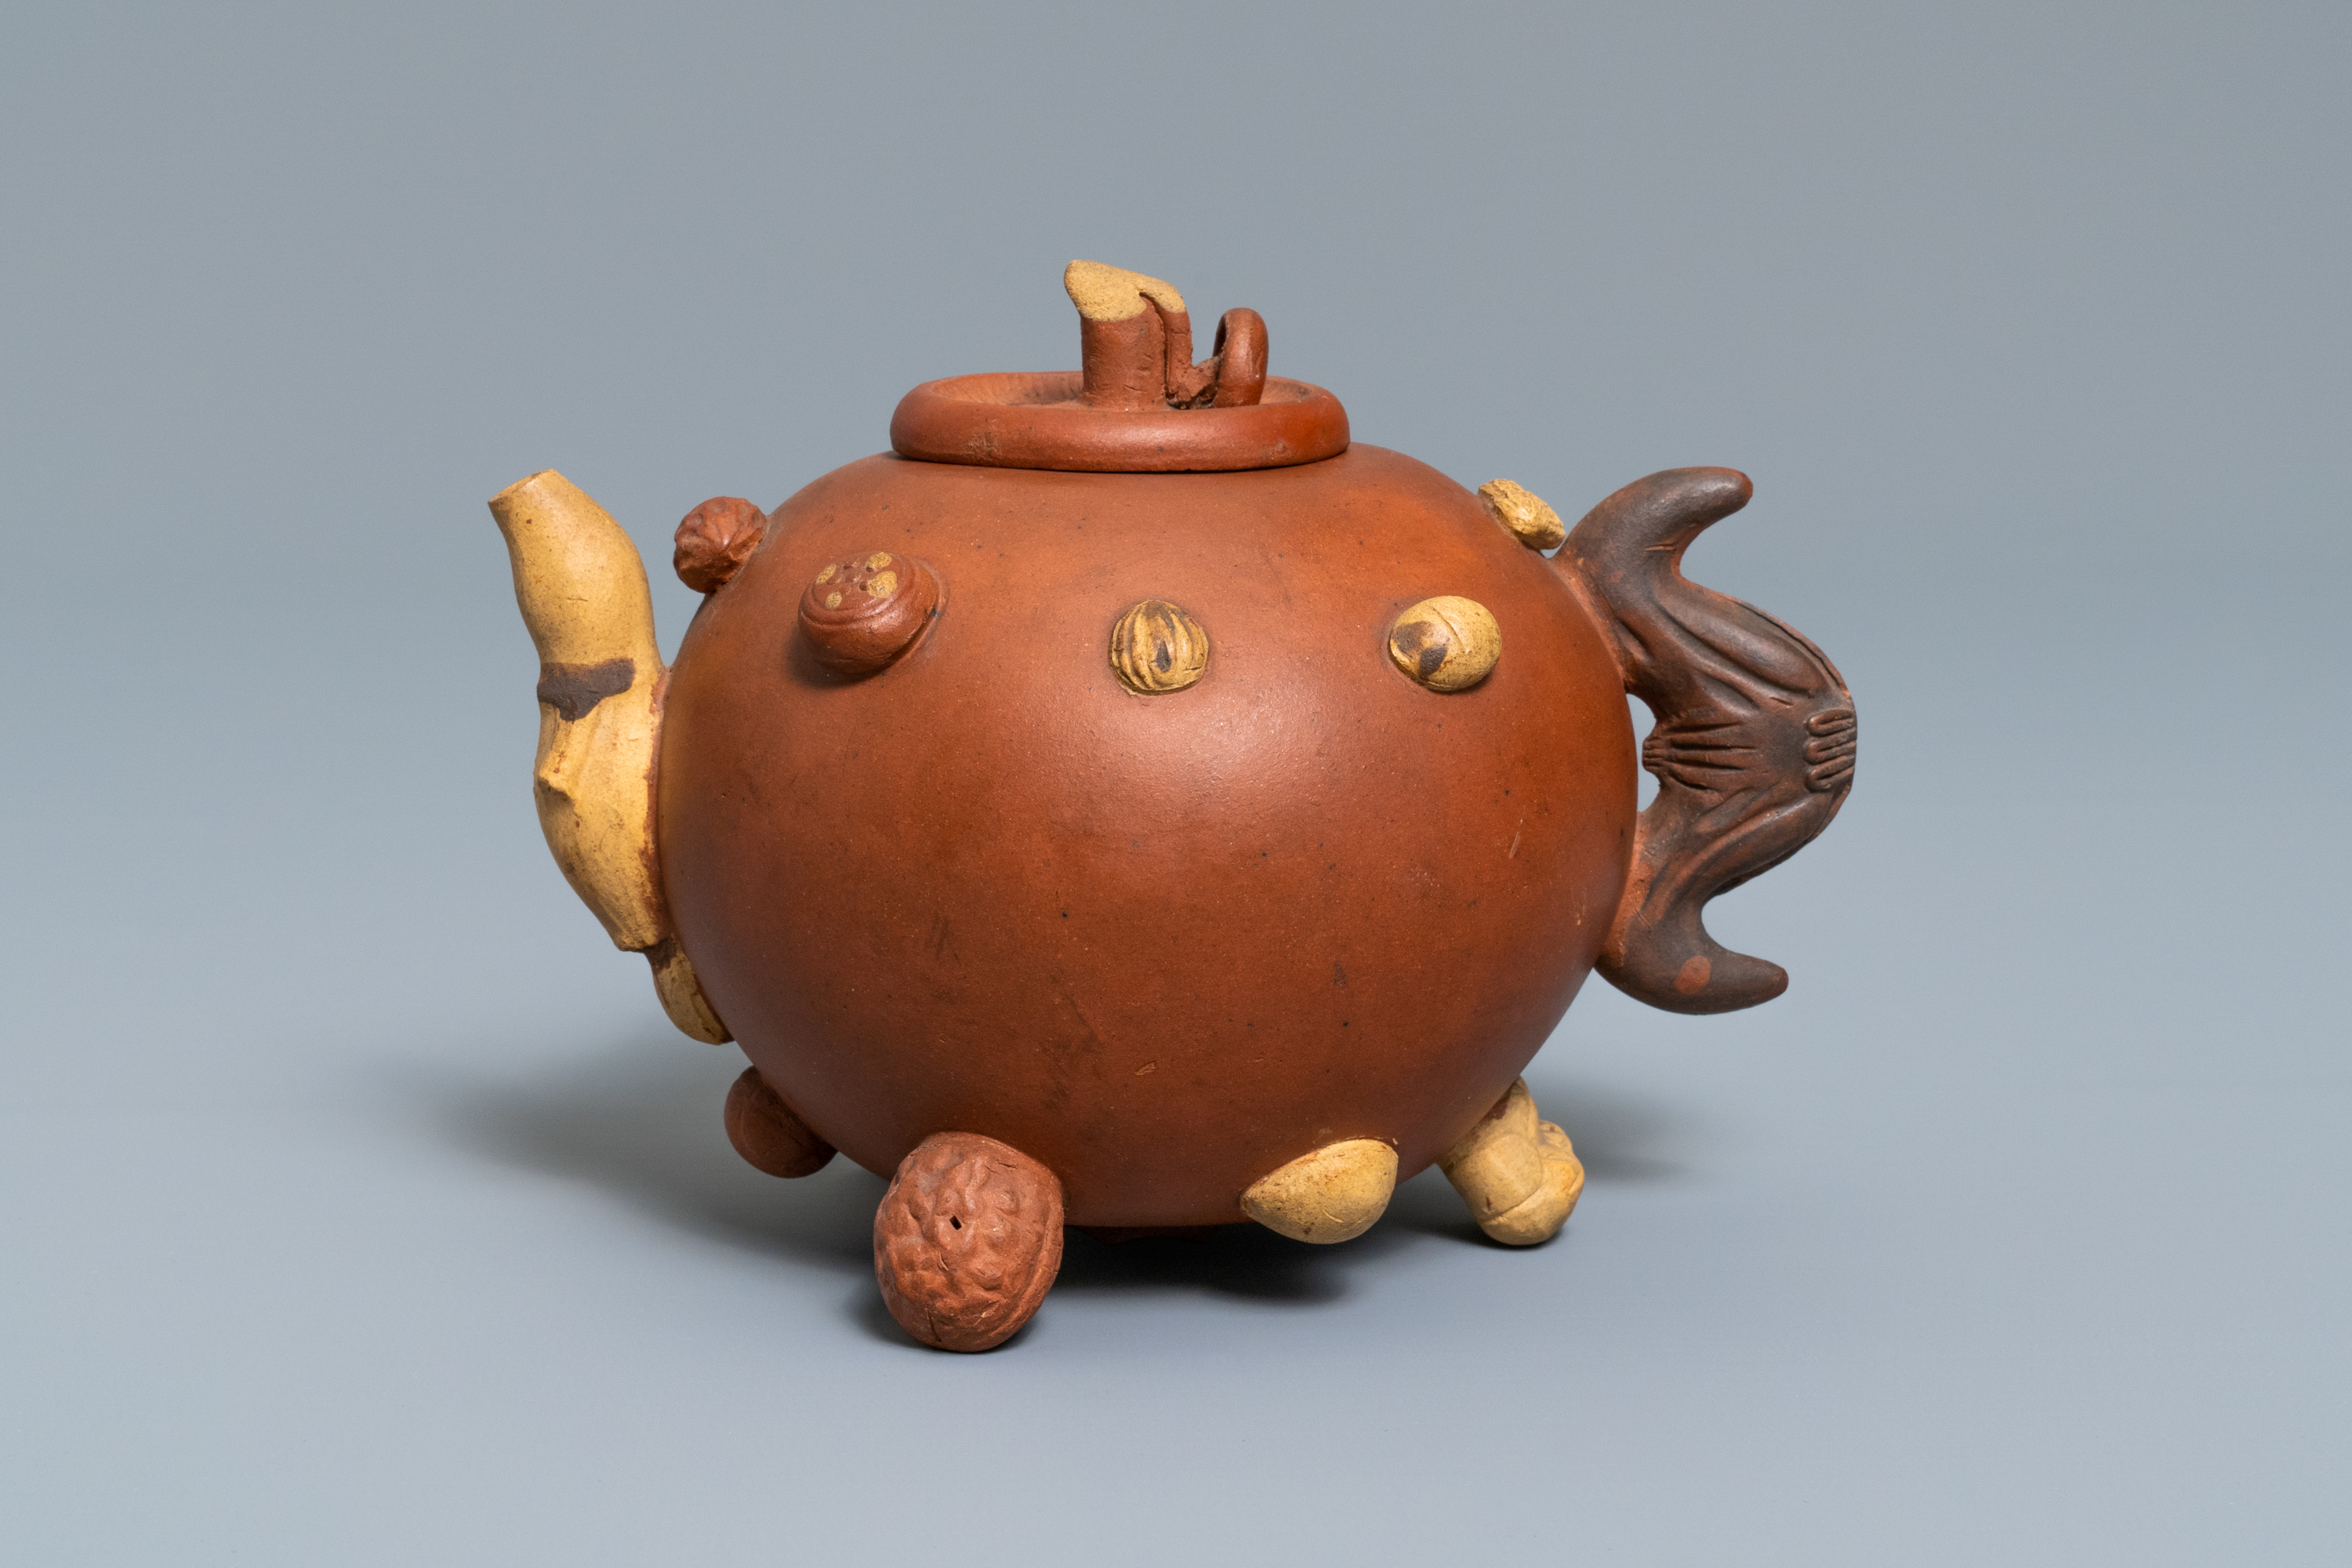 A Chinese Yixing stoneware relief-decorated teapot with nuts and fruits, impressed mark, 19th C. - Image 3 of 8